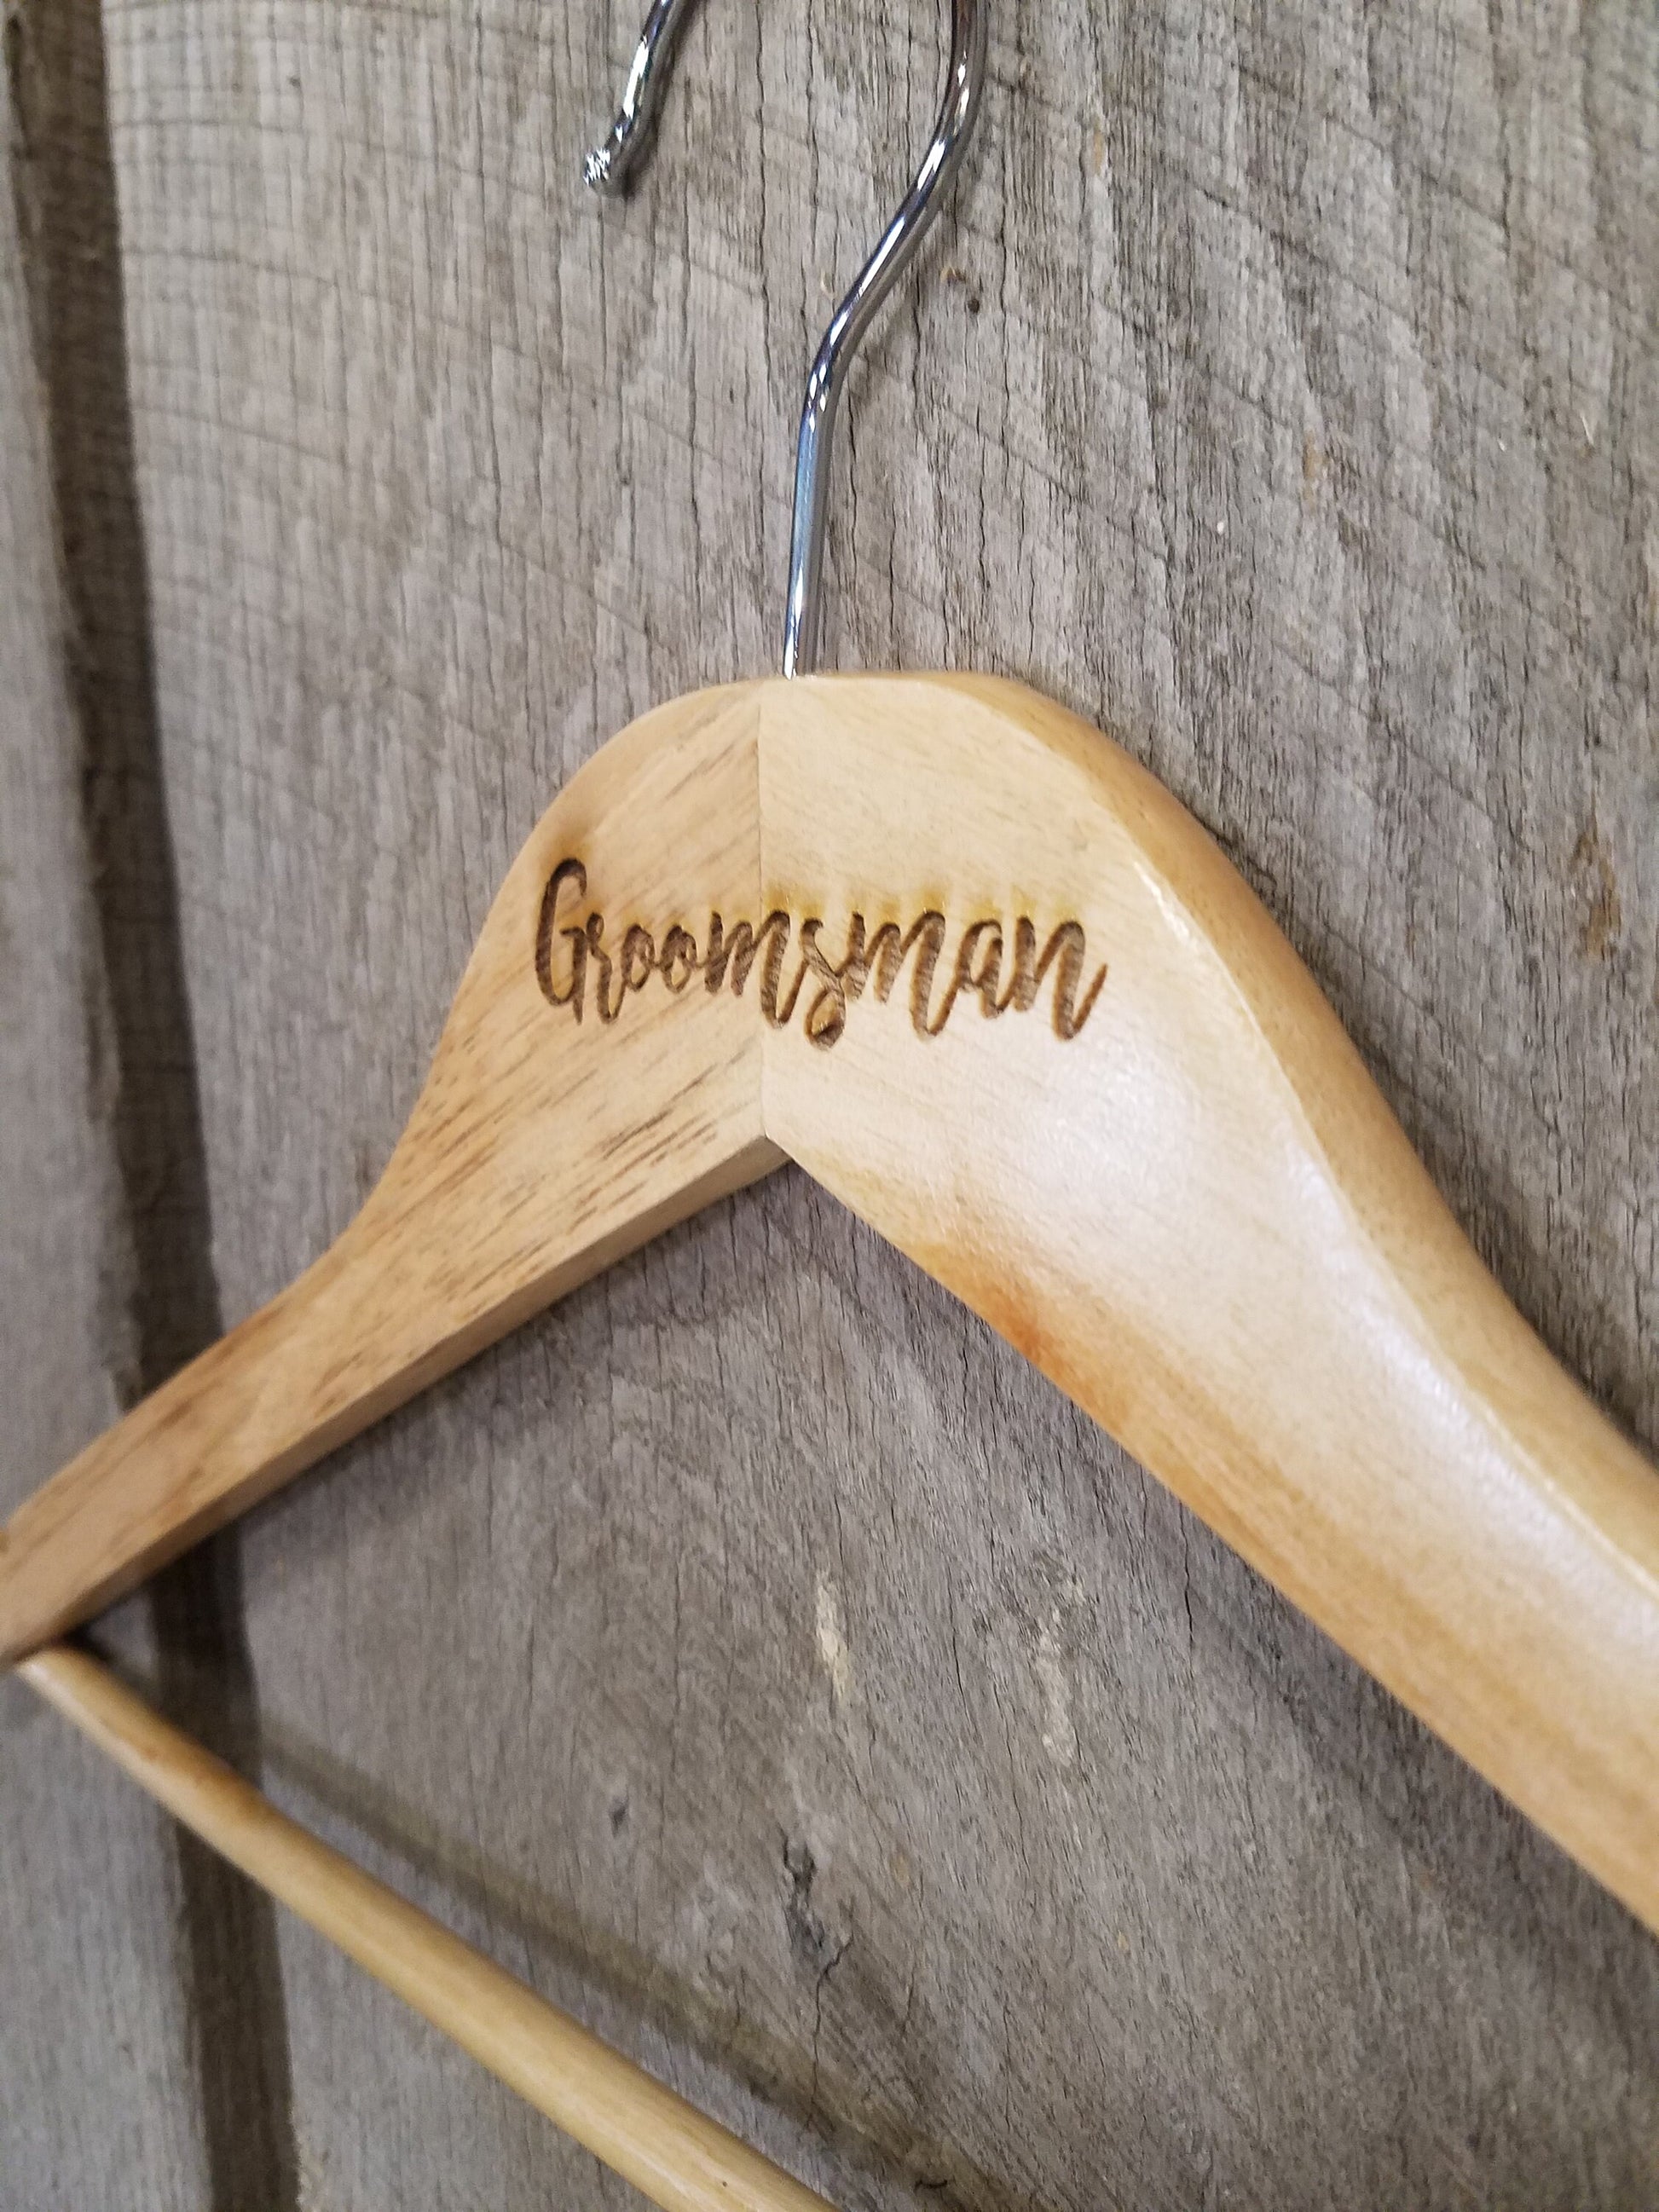 Groomsman Groomsmen Bridal Party Engraved Hard Wood Hanger Clothes Coat Sturdy Gift Wedding Bromellow Personalized